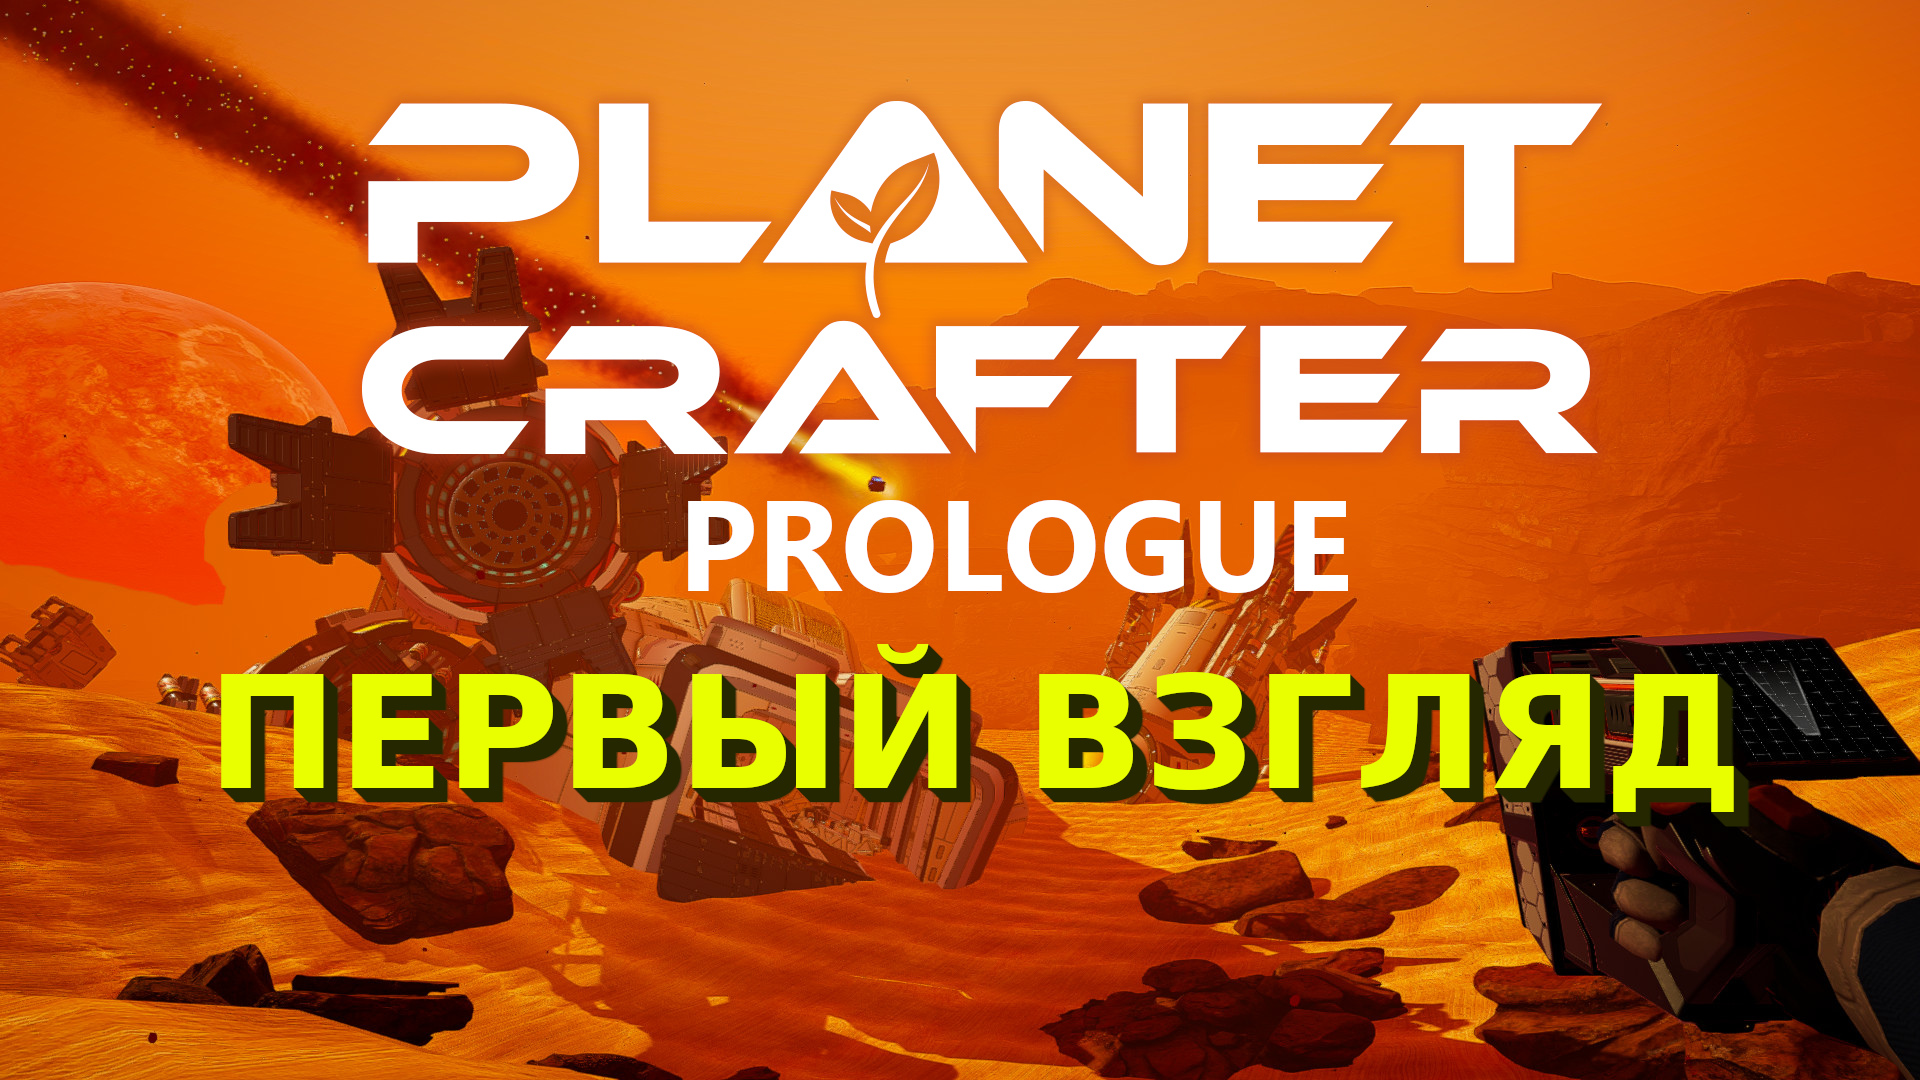 The Planet Crafter: Prologue. The Planet Crafter. The planet crafter читы